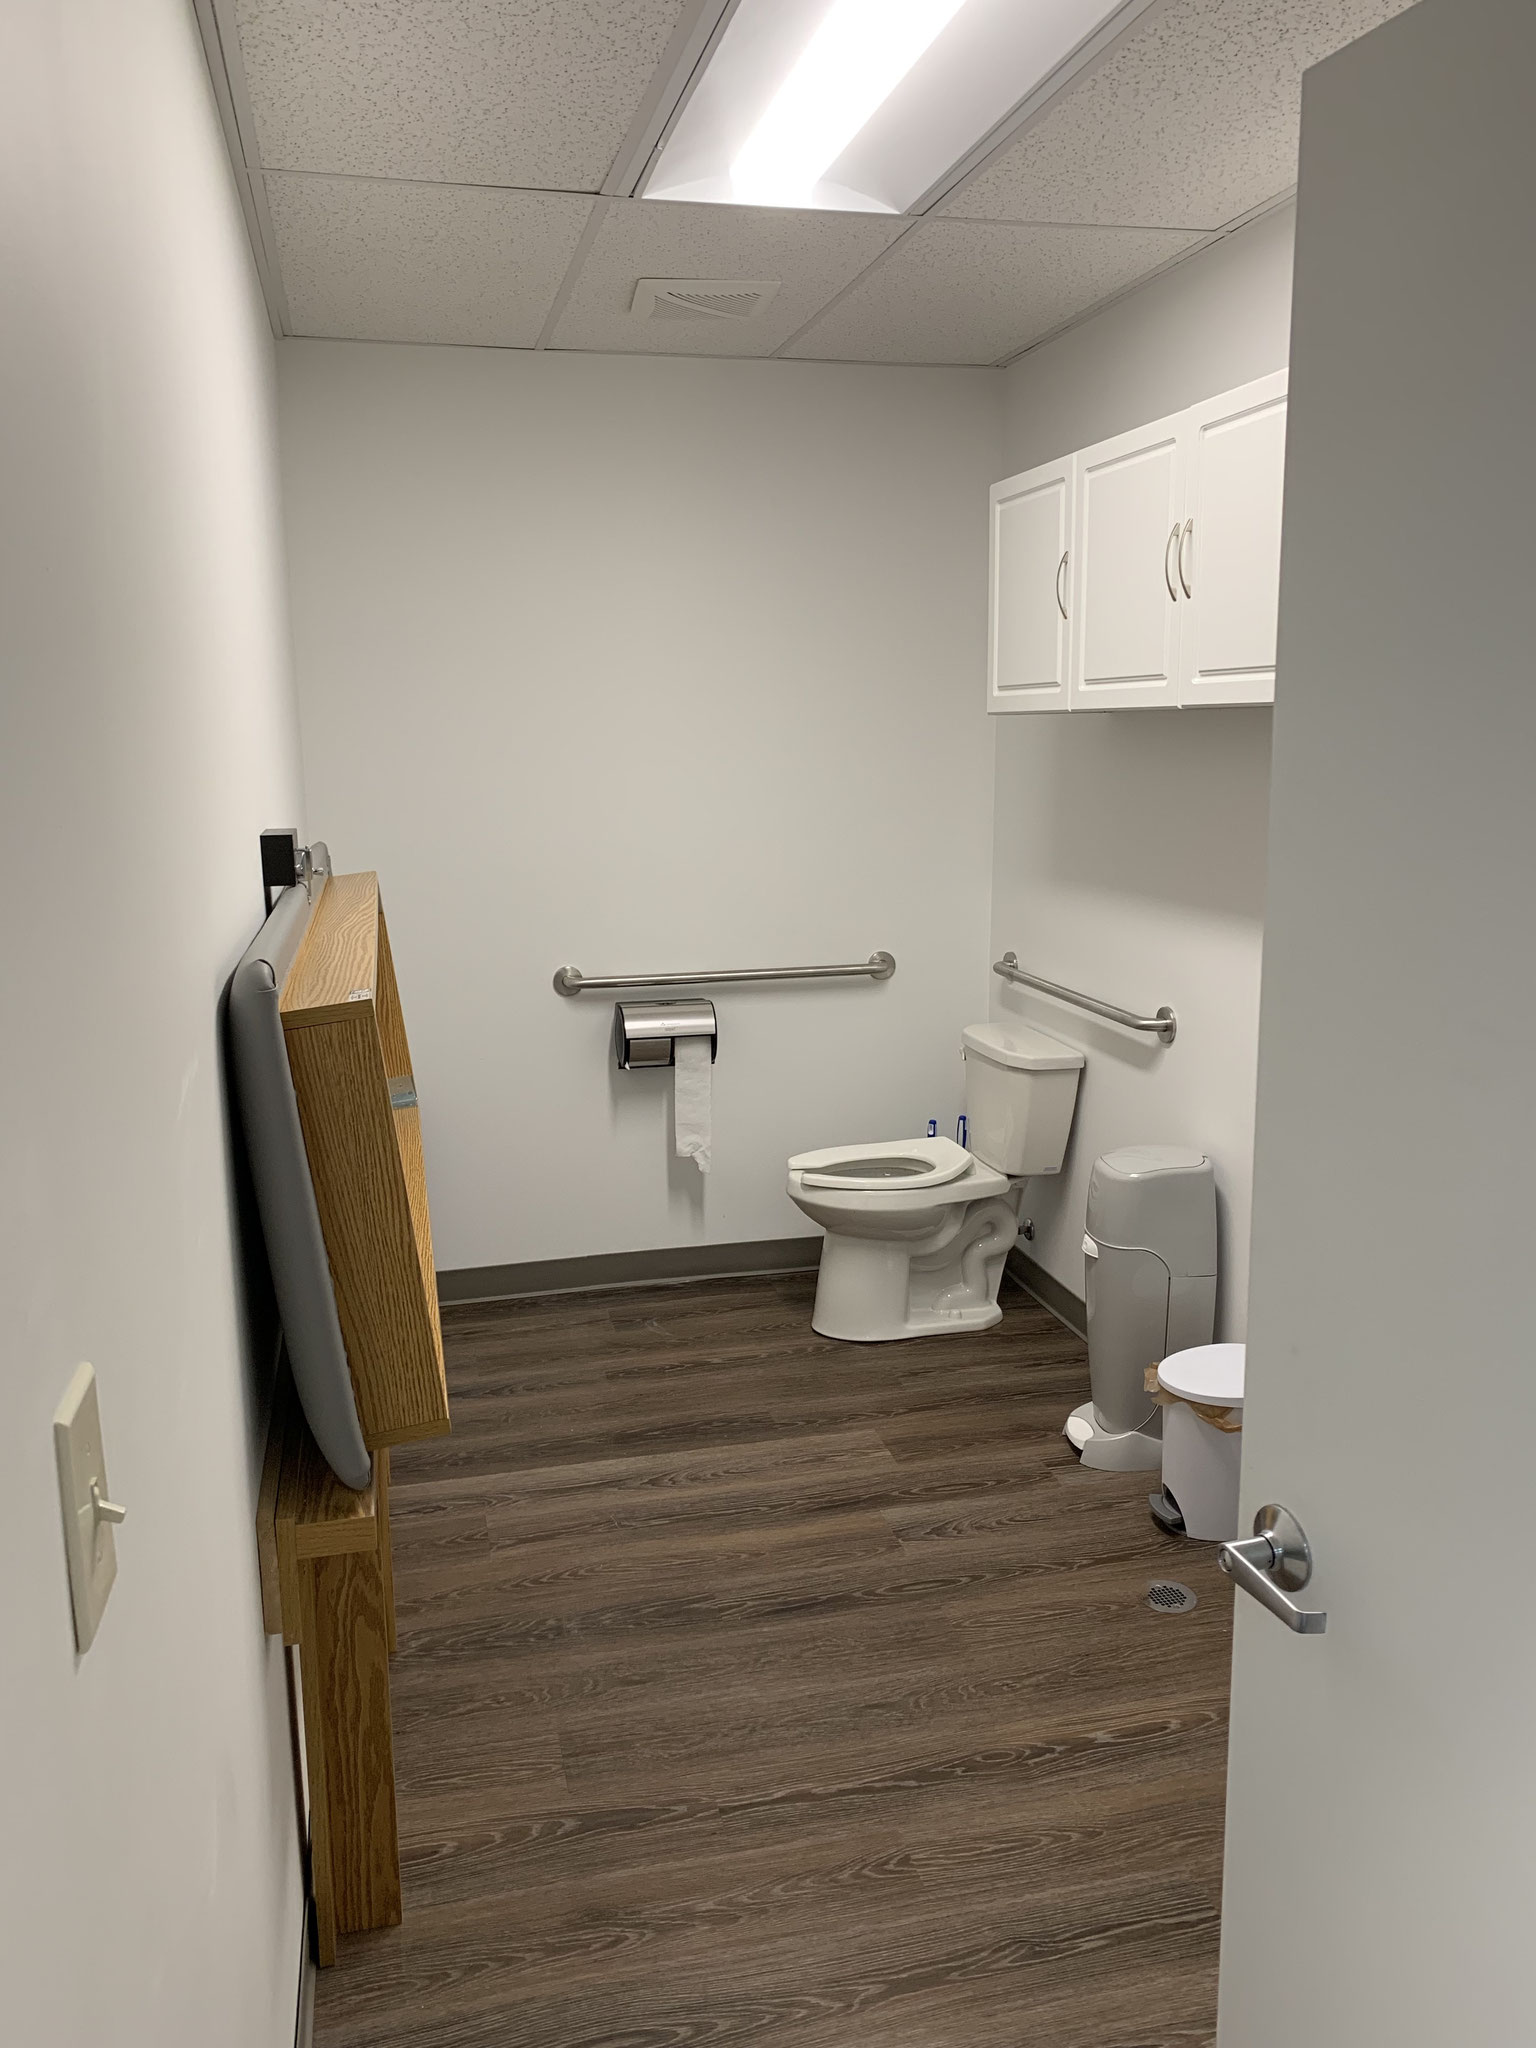 Bathroom with changing station